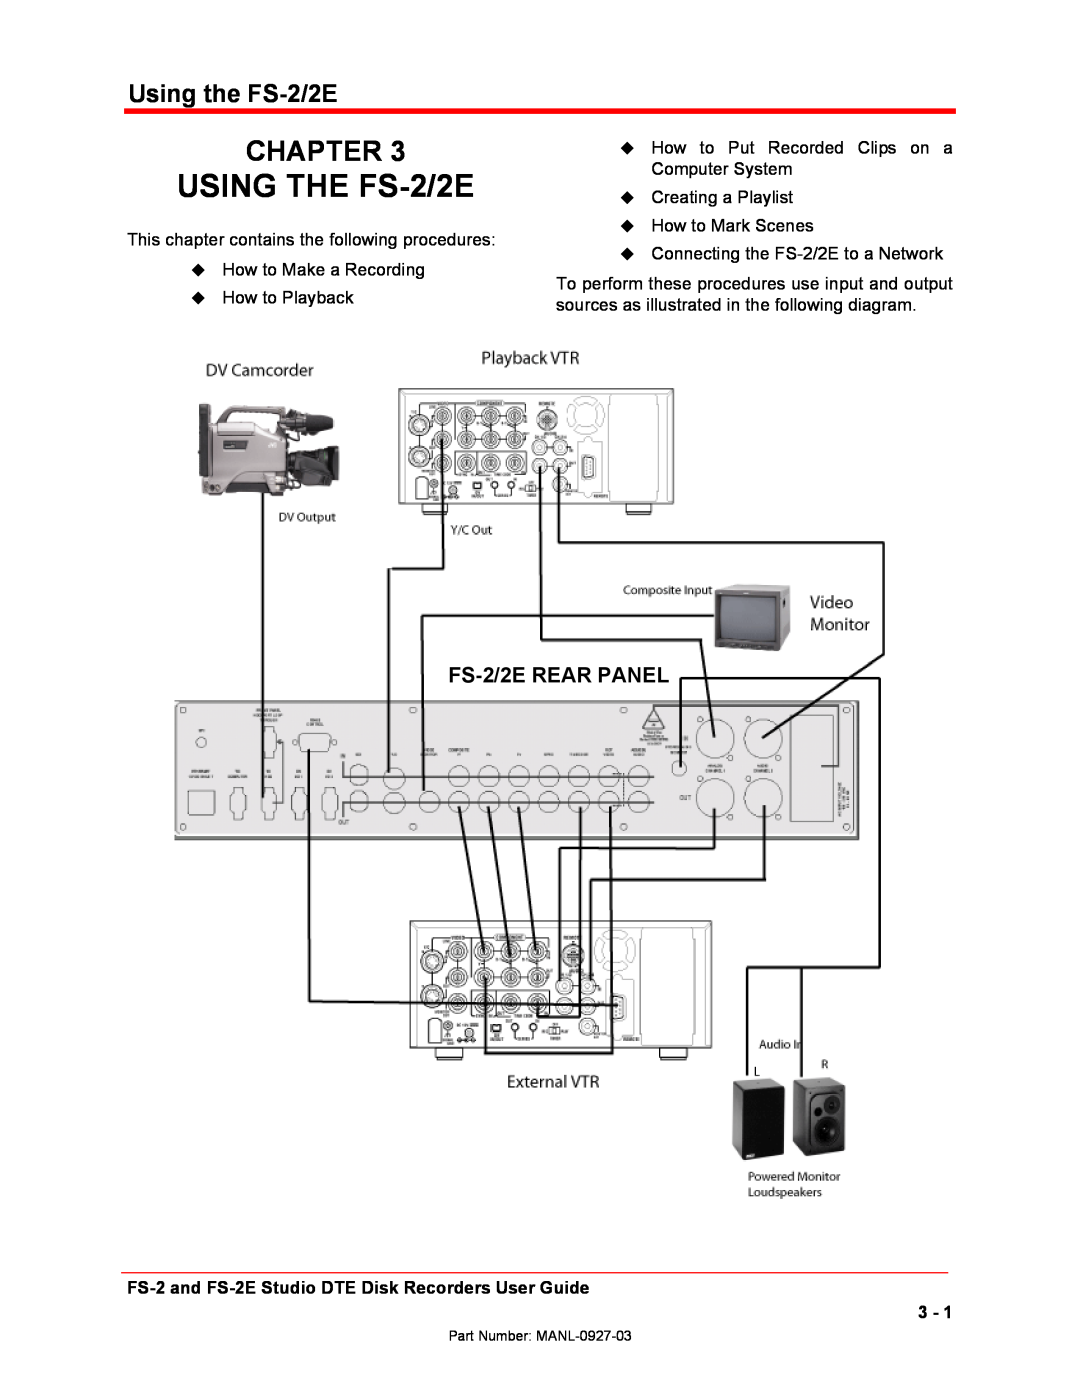 FOCUS Enhancements manual USING THE FS-2/2E, Using the FS-2/2E, FS-2/2EREAR PANEL, Chapter 